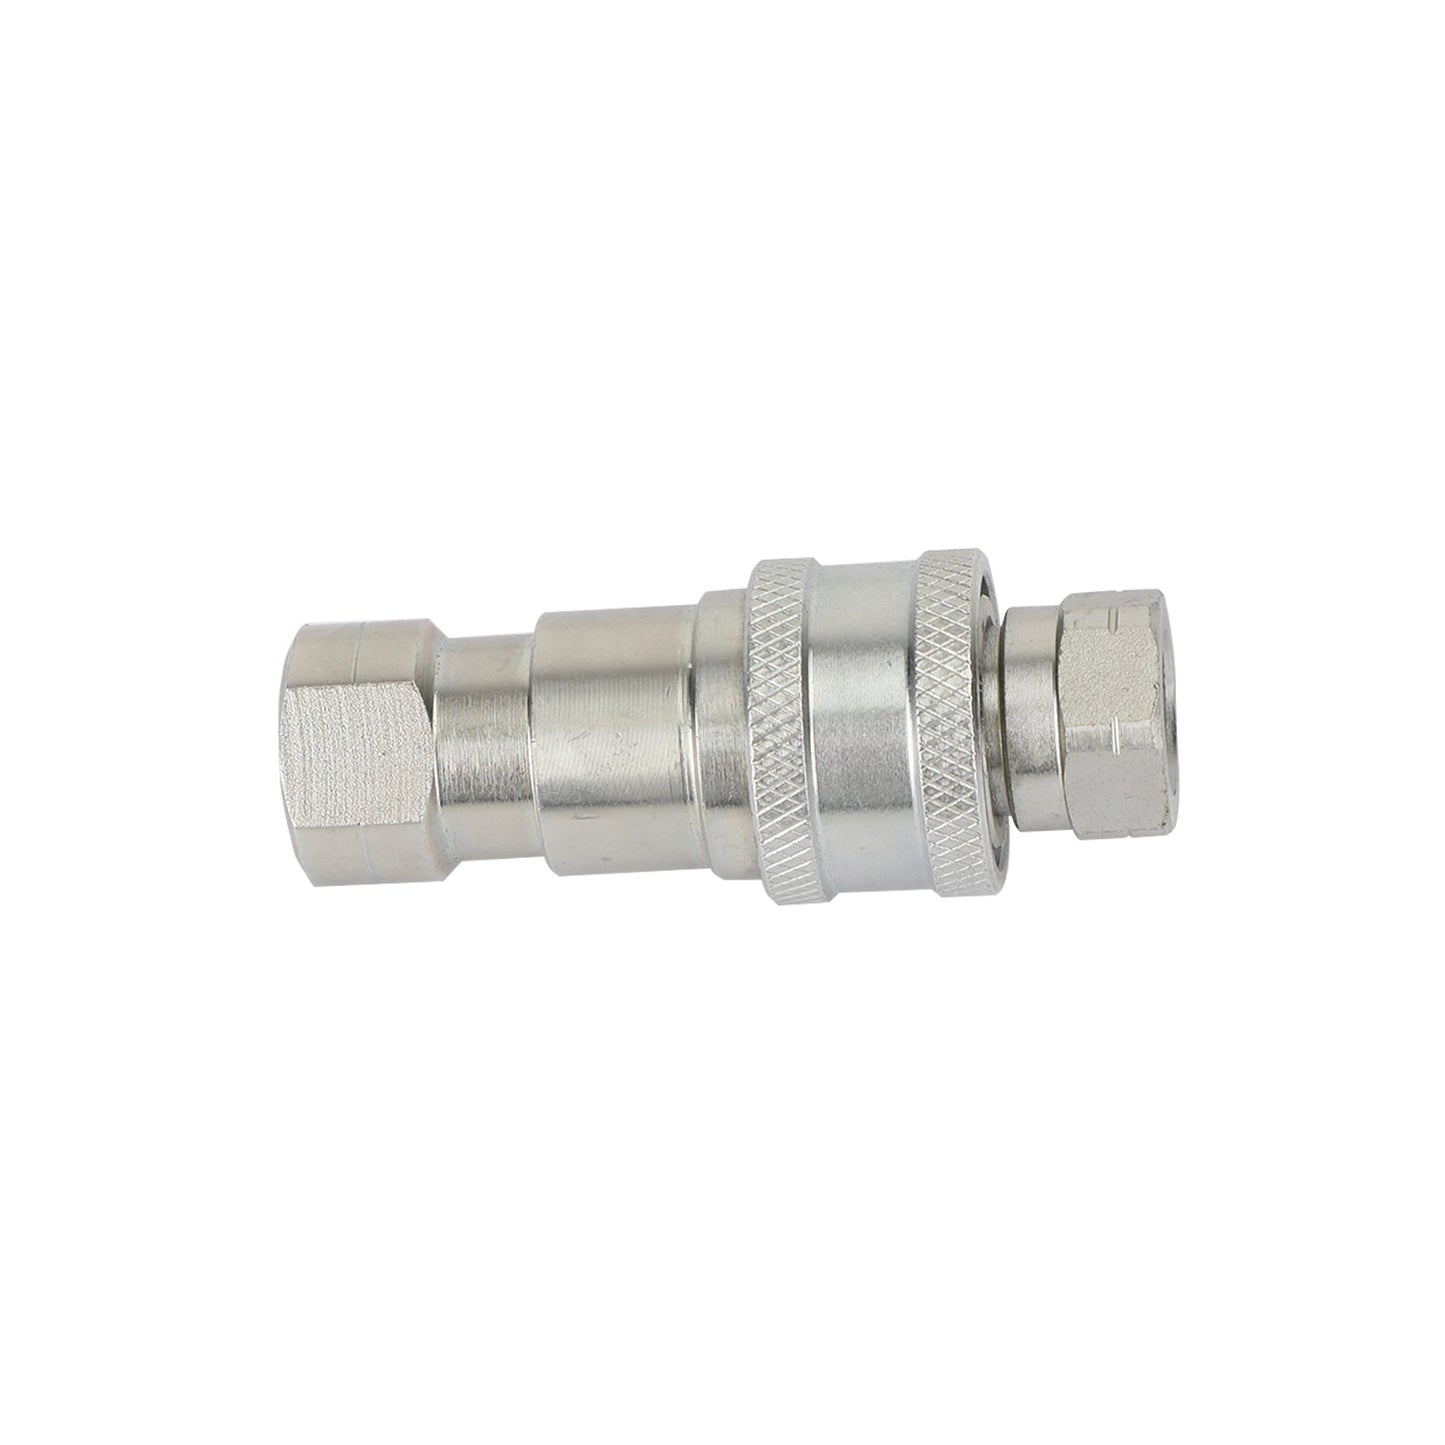 1 Sets 1/4" NPT ISO 7241-B Quick Disconnect Hydraulic Couplings / Couplers